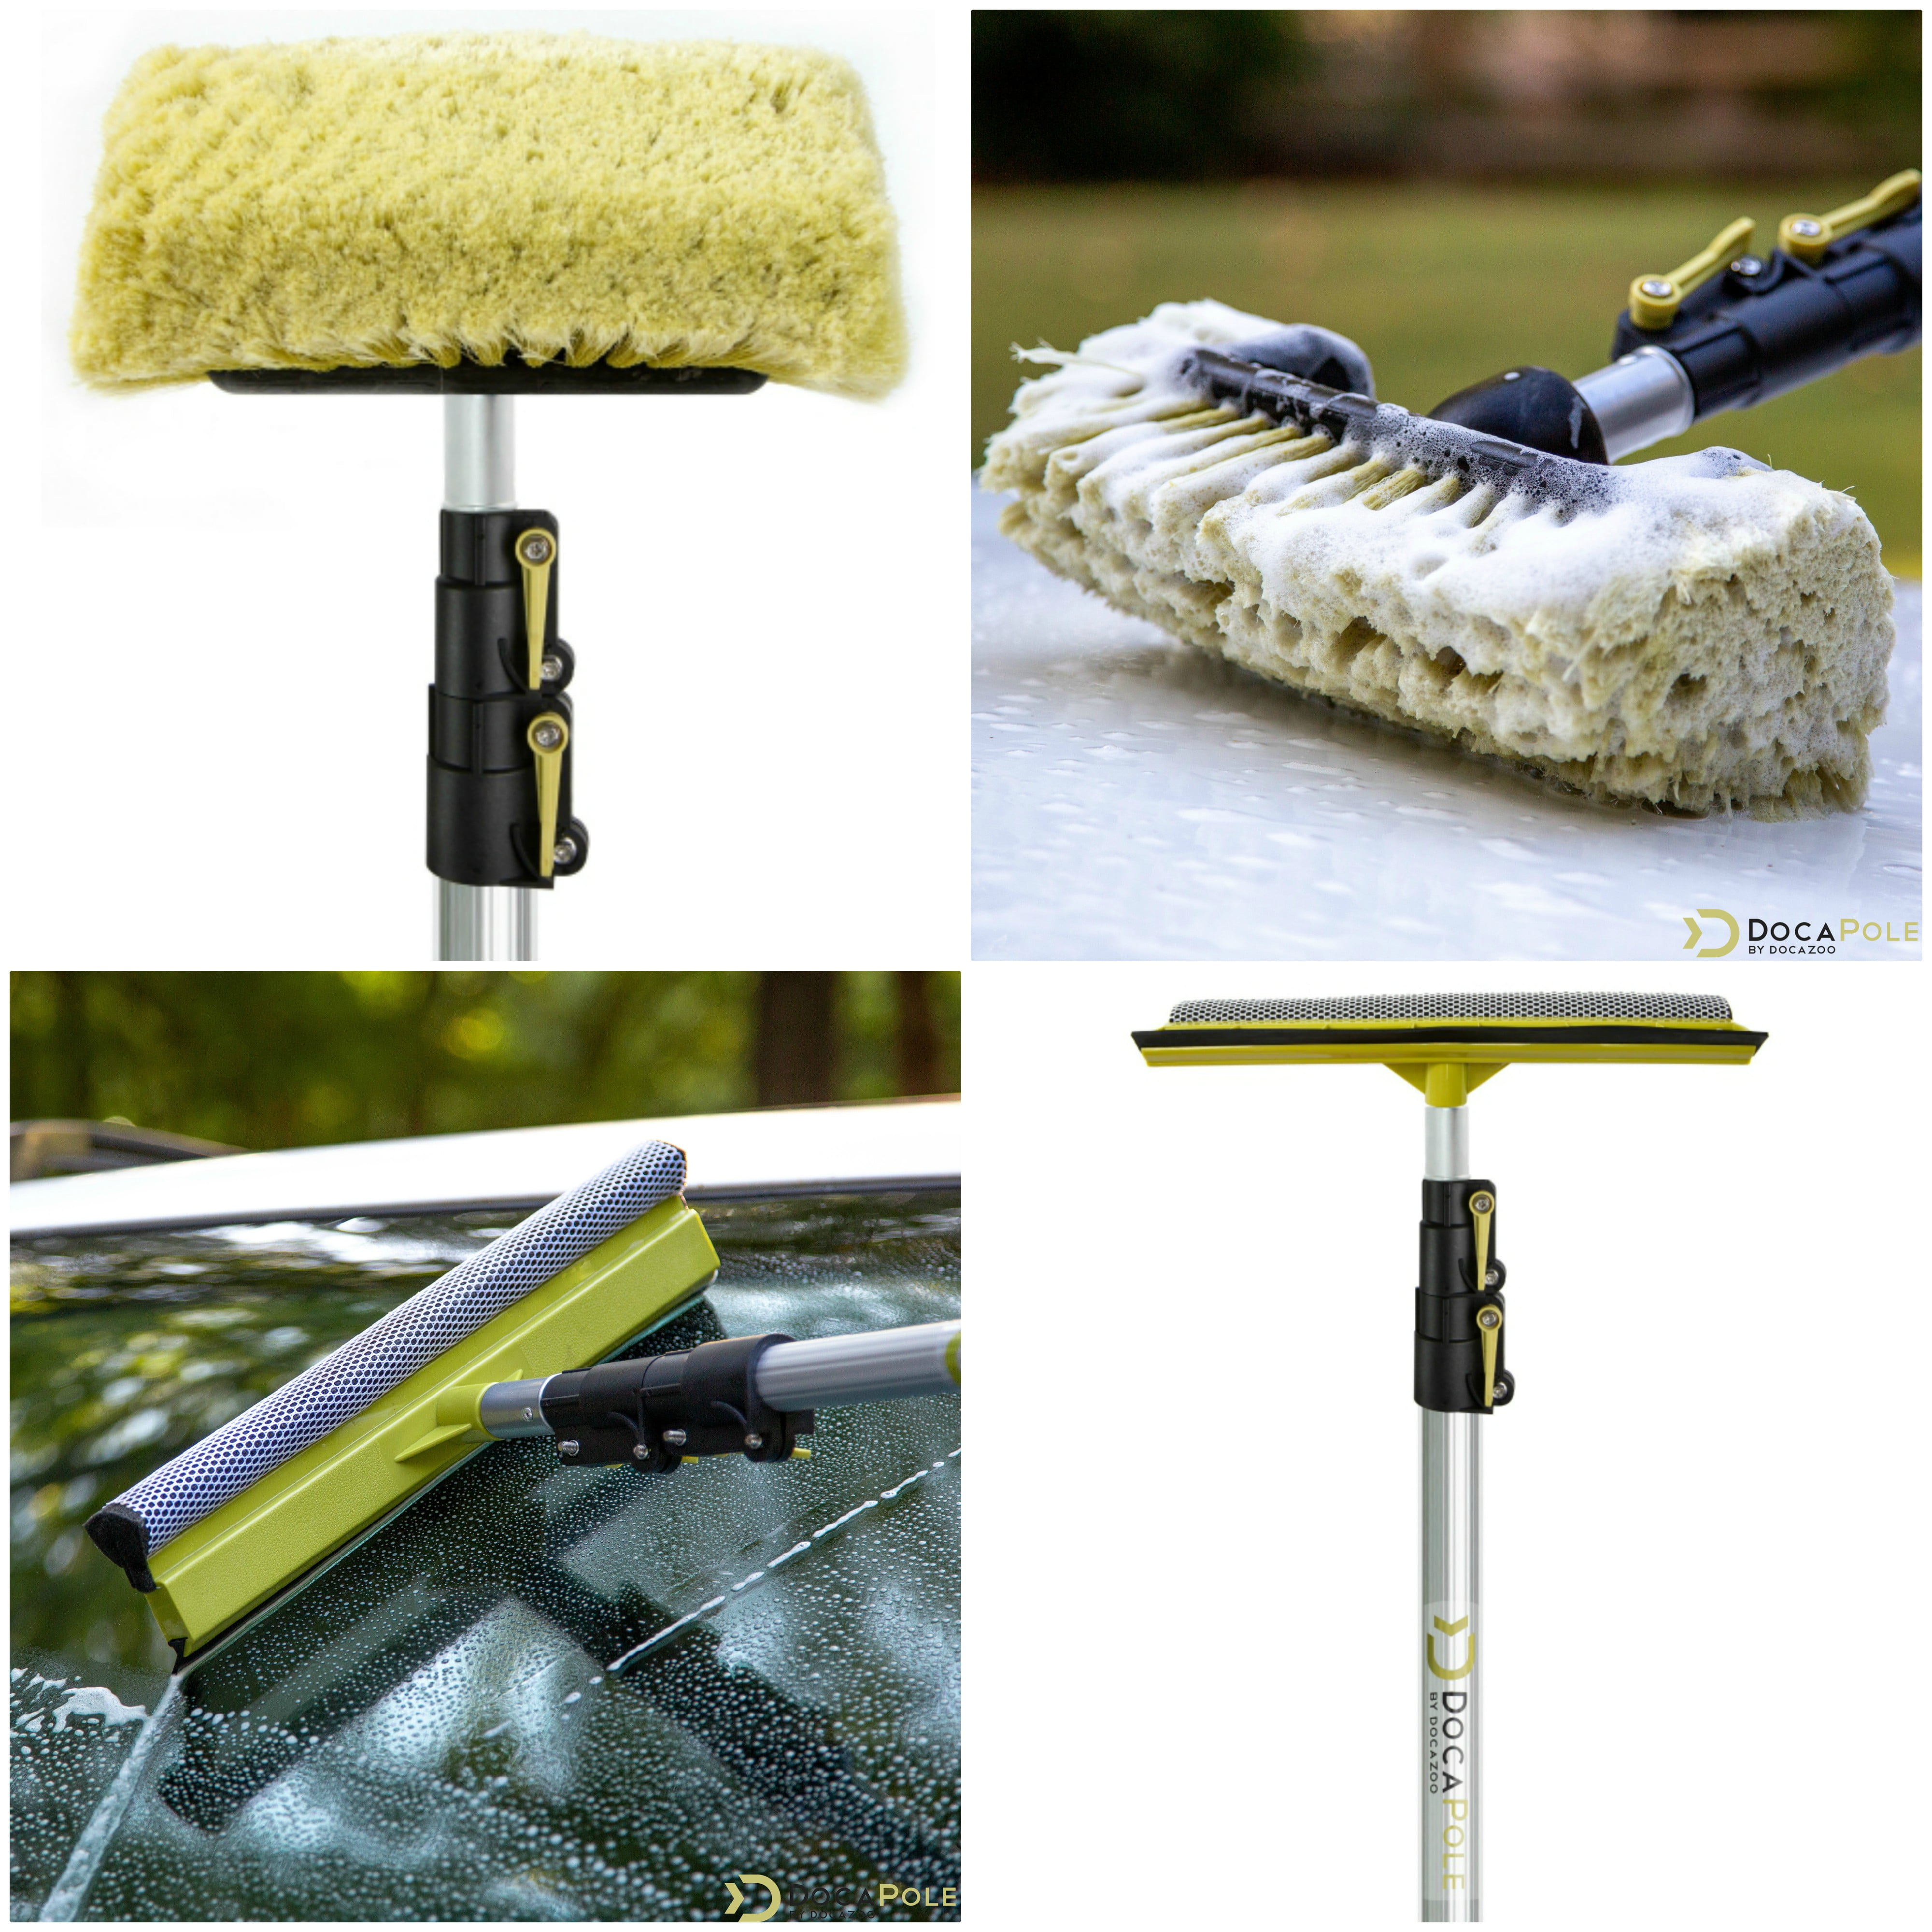 DOCAZOO DocaPole 20 ft High Reach Brush Kit with 5-12 Foot Telescopic  Extension Pole; Includes Soft Scrub Car Wash Brush, Medium Bristle Cleaning